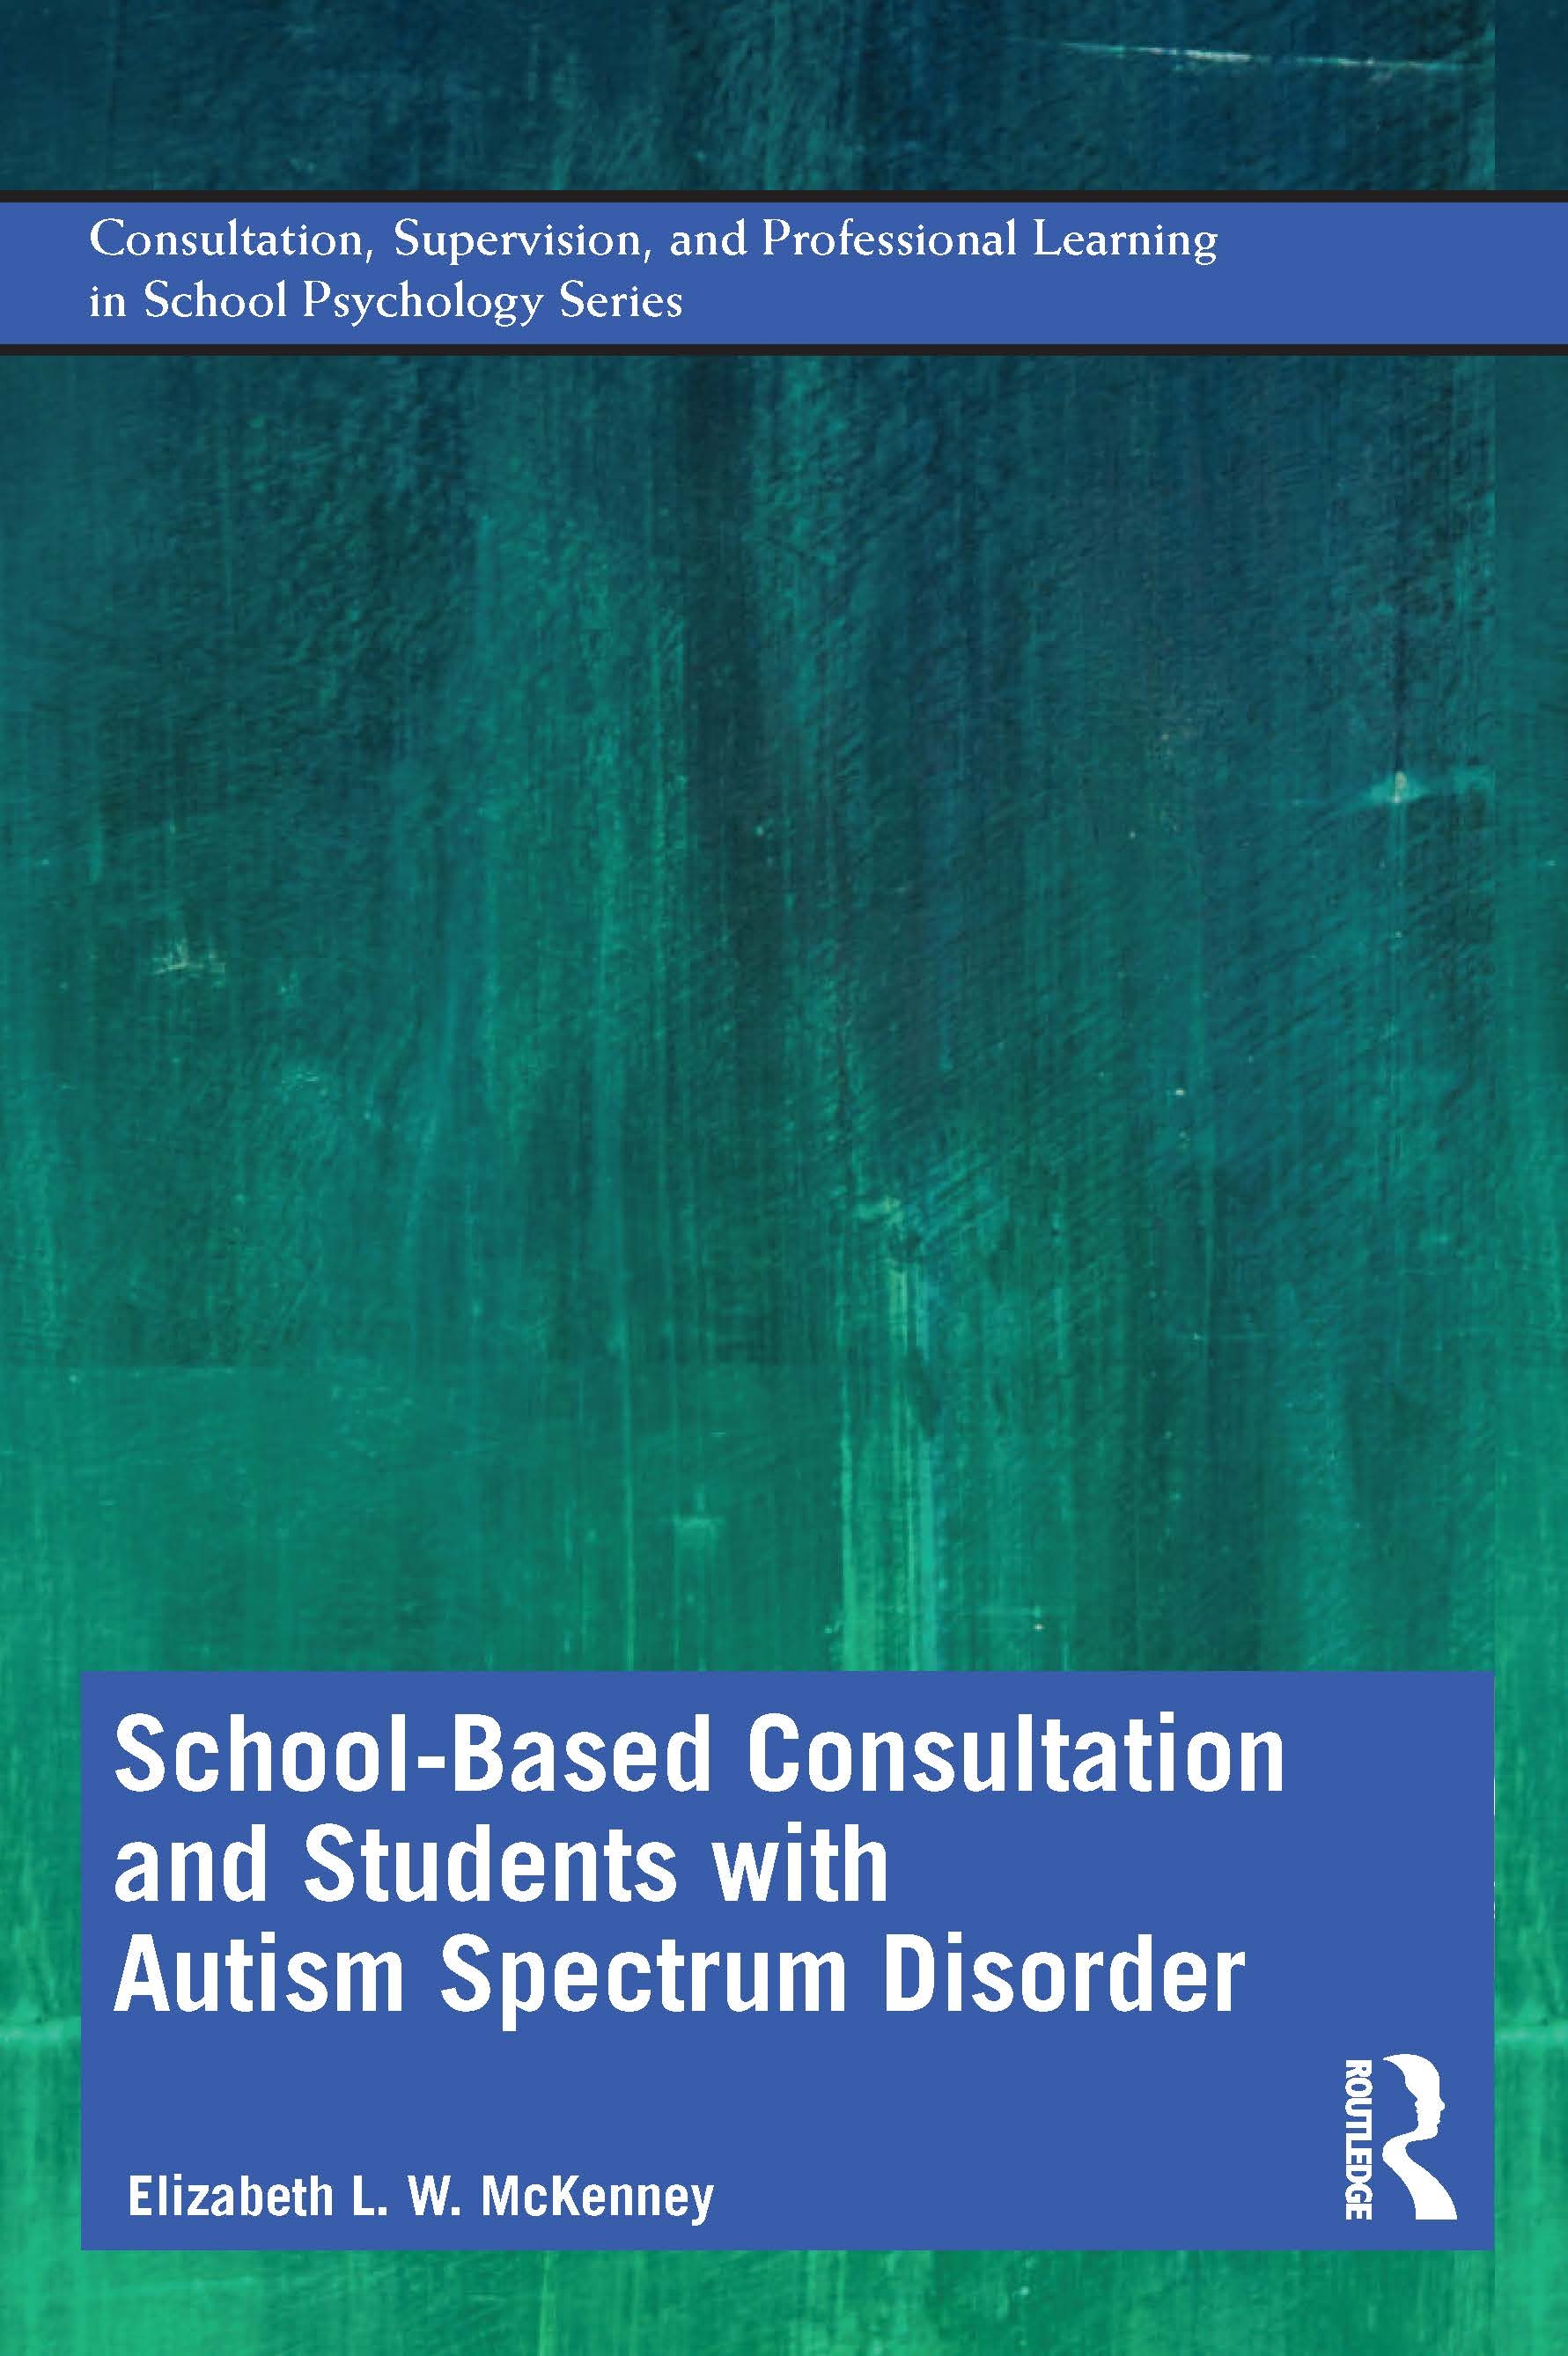 School-Based Consultation for Students with Autism Spectrum Disorder